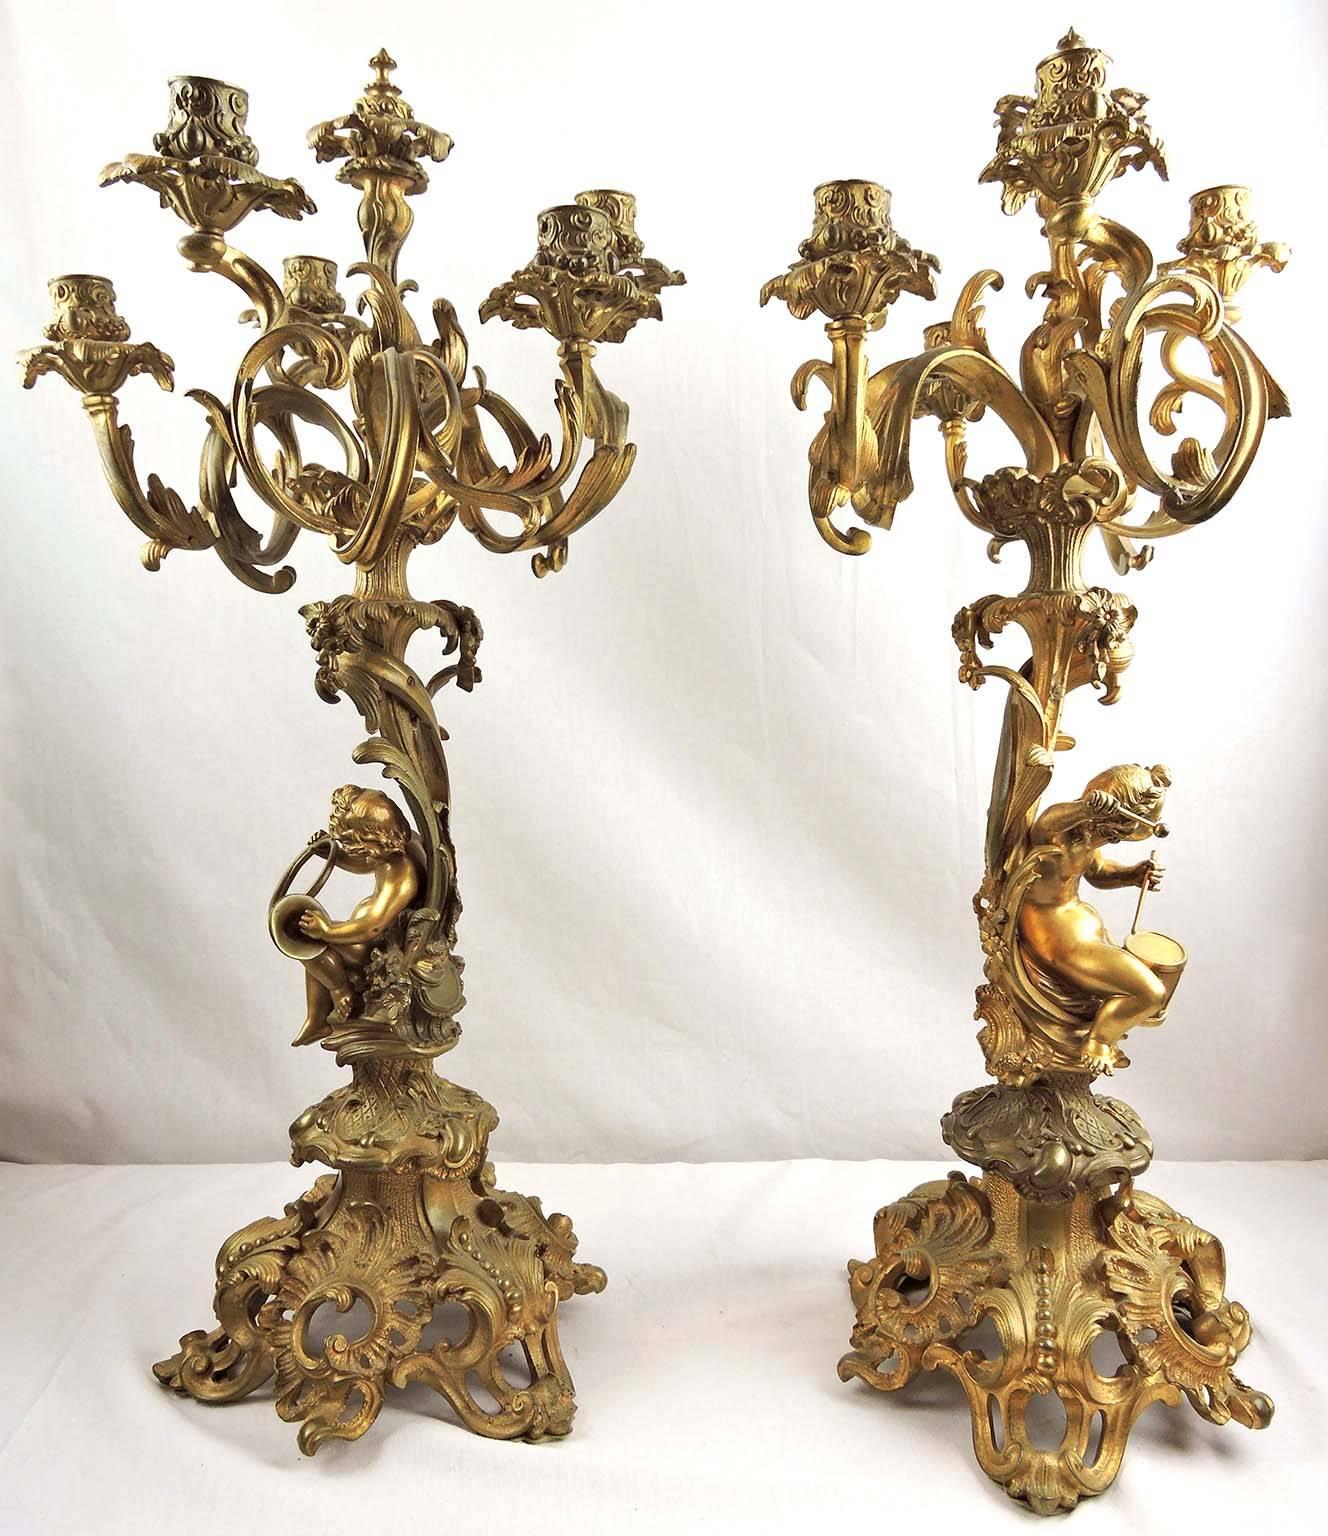 Pair of Large 19th Century Gilt Bronze-Mounted Six-Arm Figural Rococo Candelabra In Good Condition For Sale In Toronto, ONTARIO